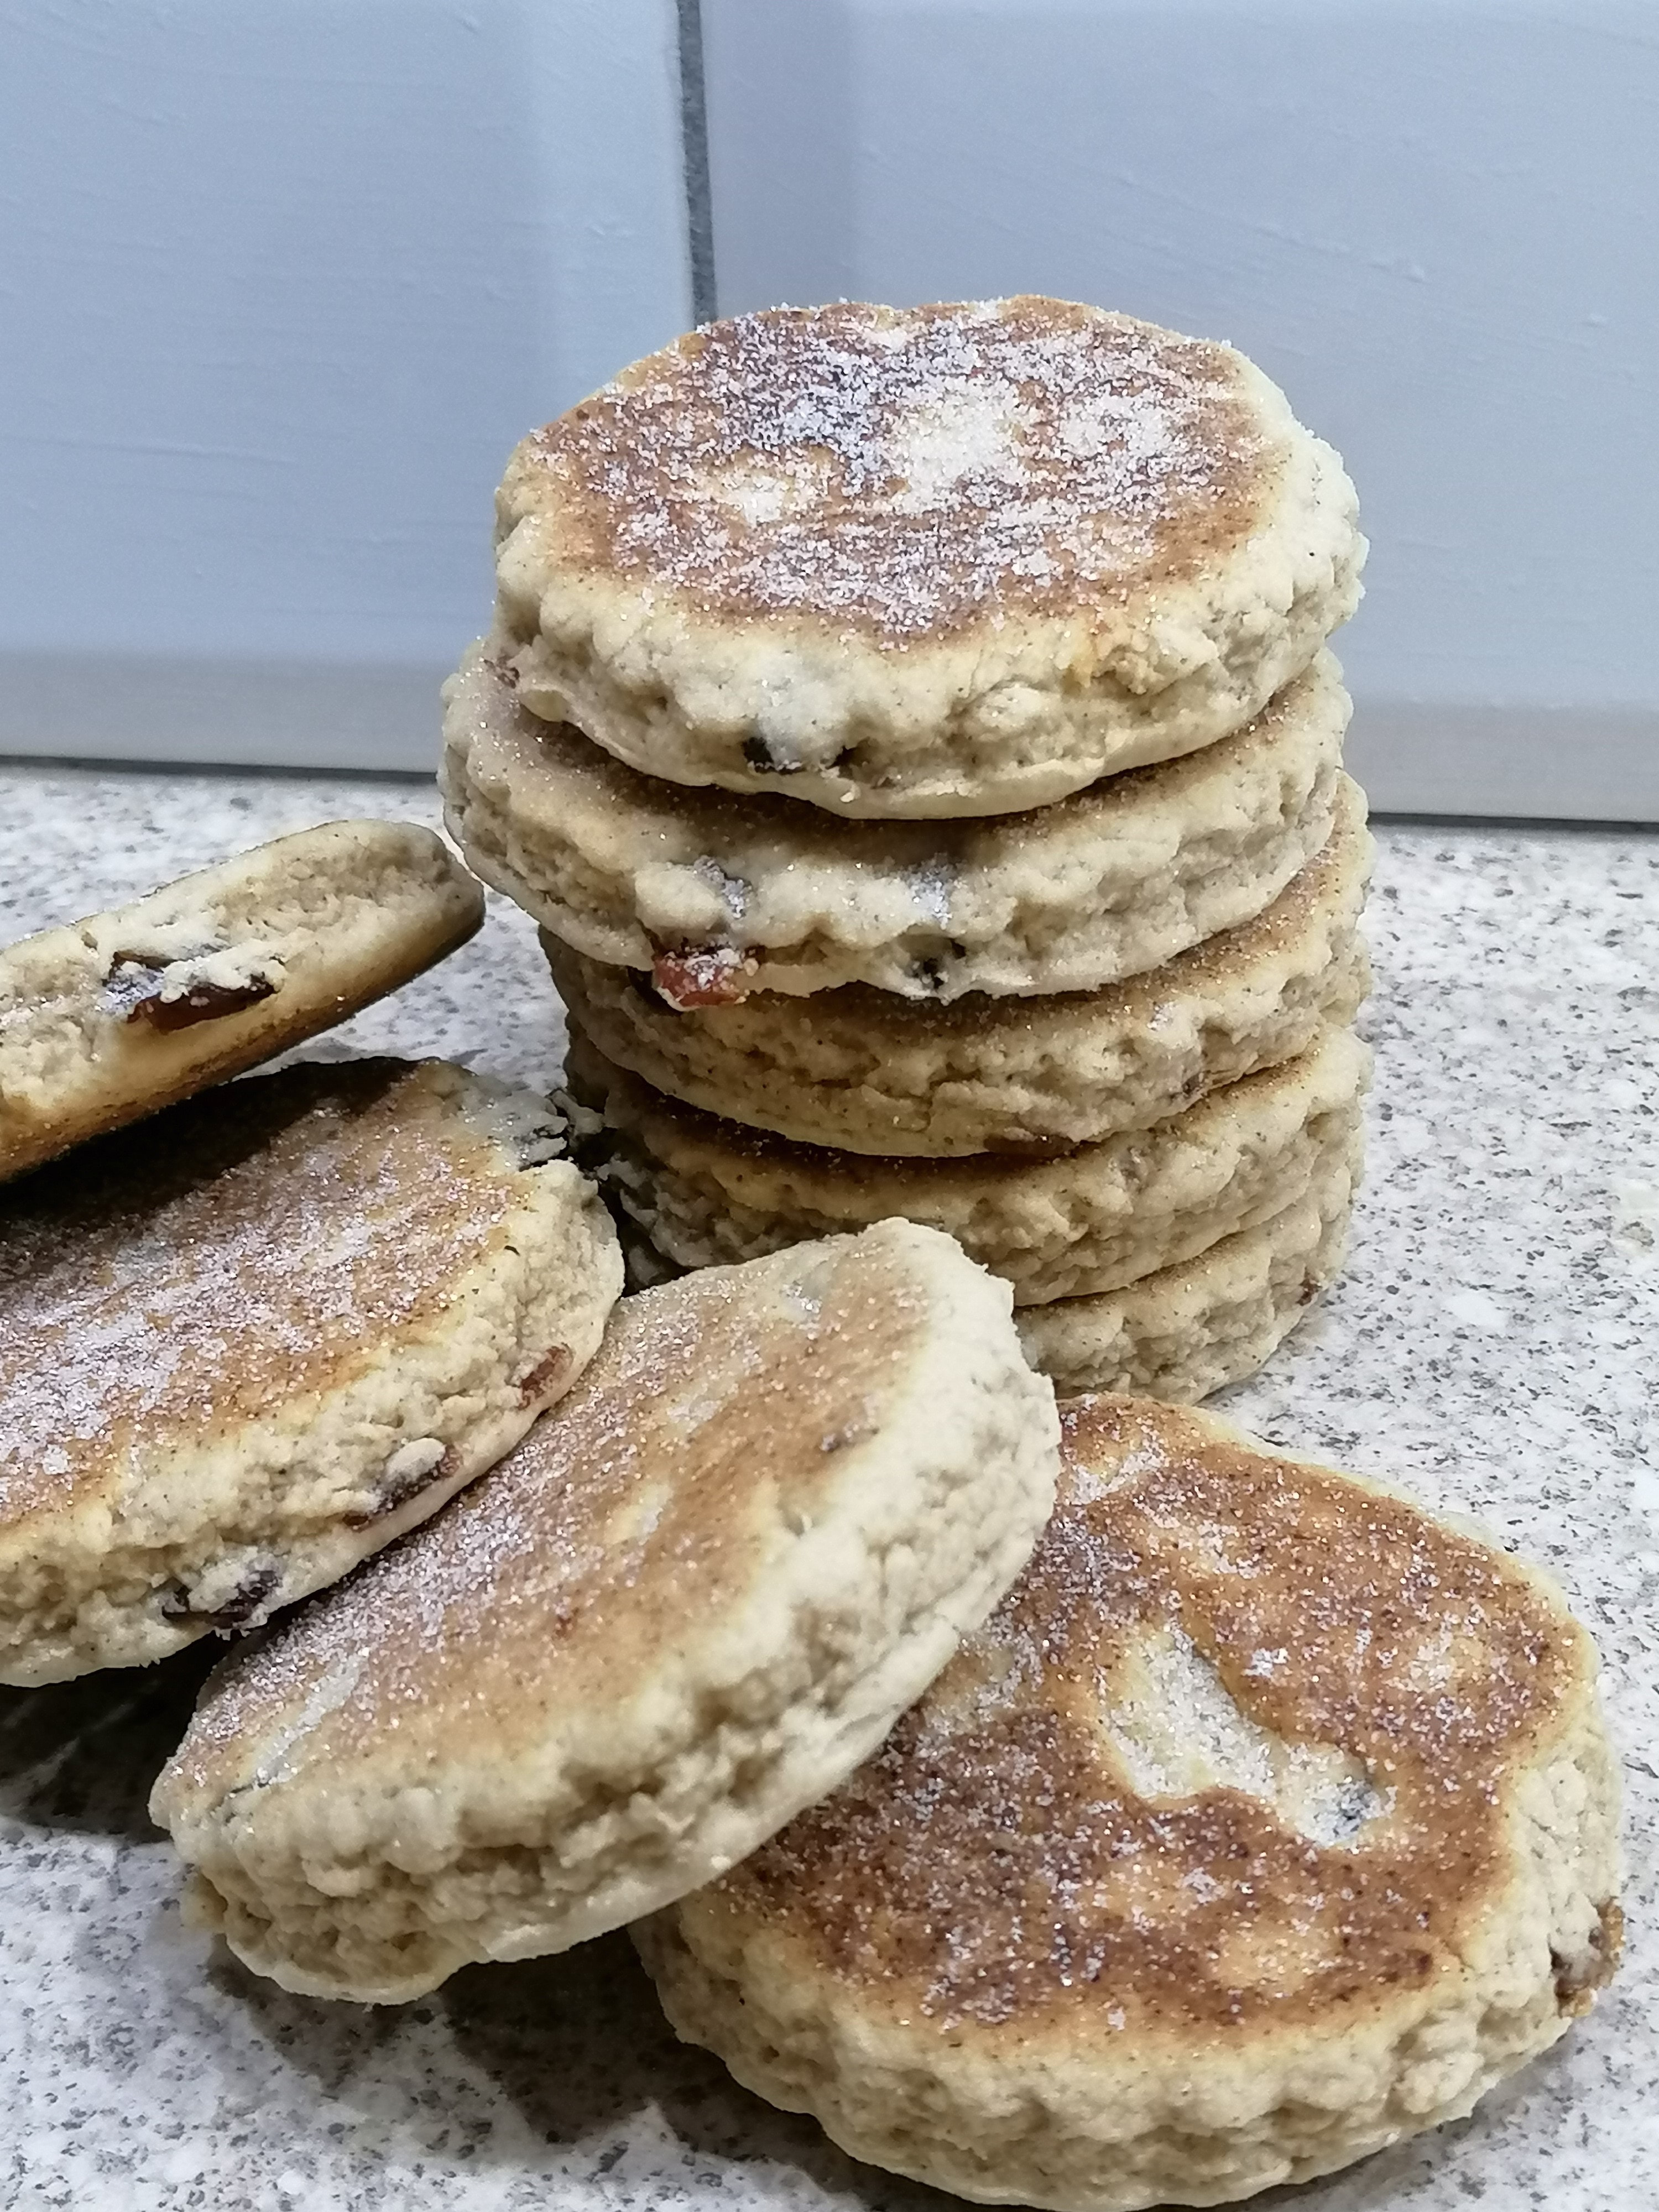 Make you own speciality flavoured Welsh Cakes - Buy Online for home delivery